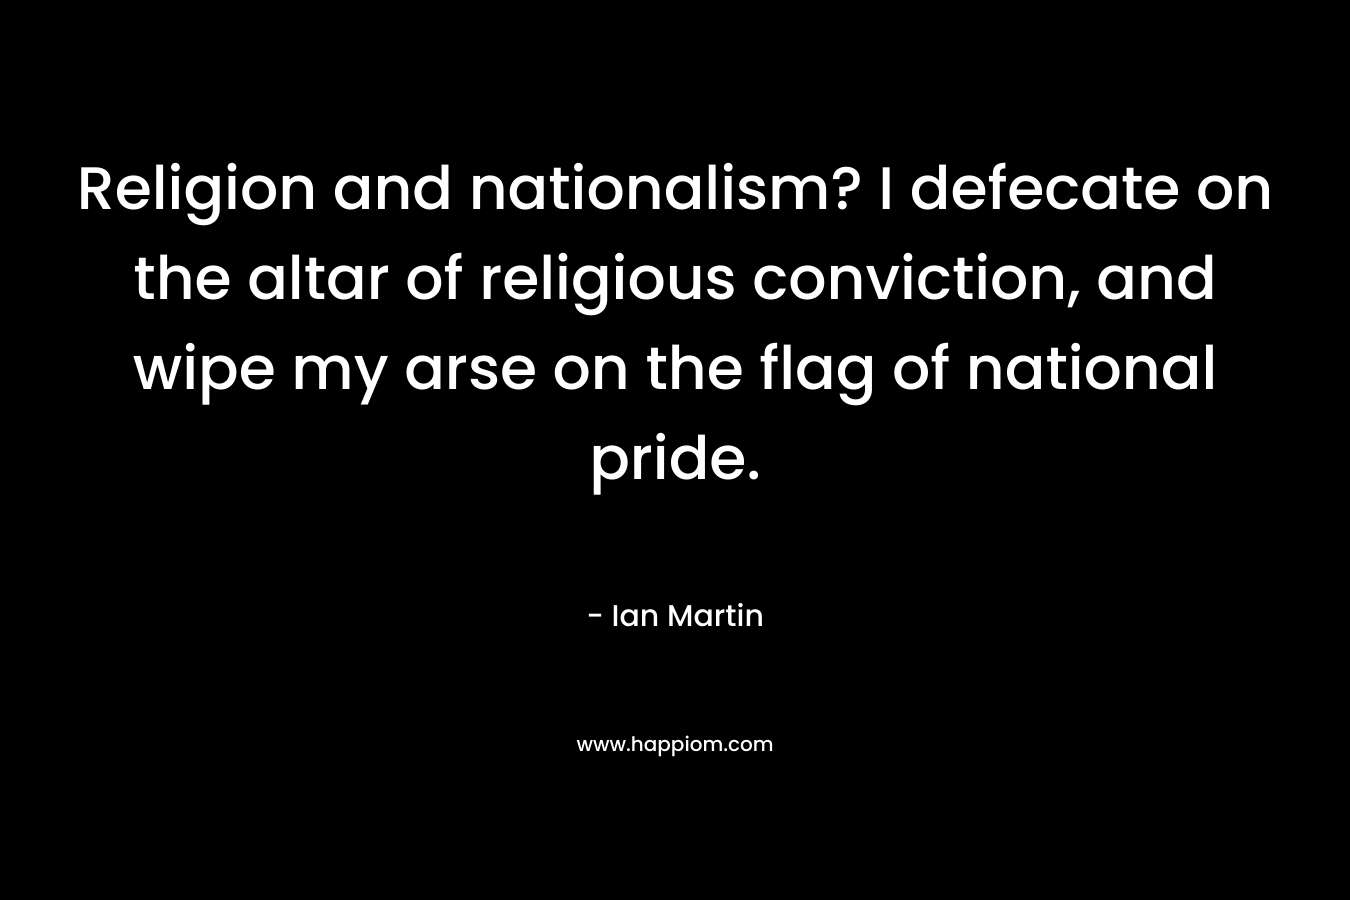 Religion and nationalism? I defecate on the altar of religious conviction, and wipe my arse on the flag of national pride.